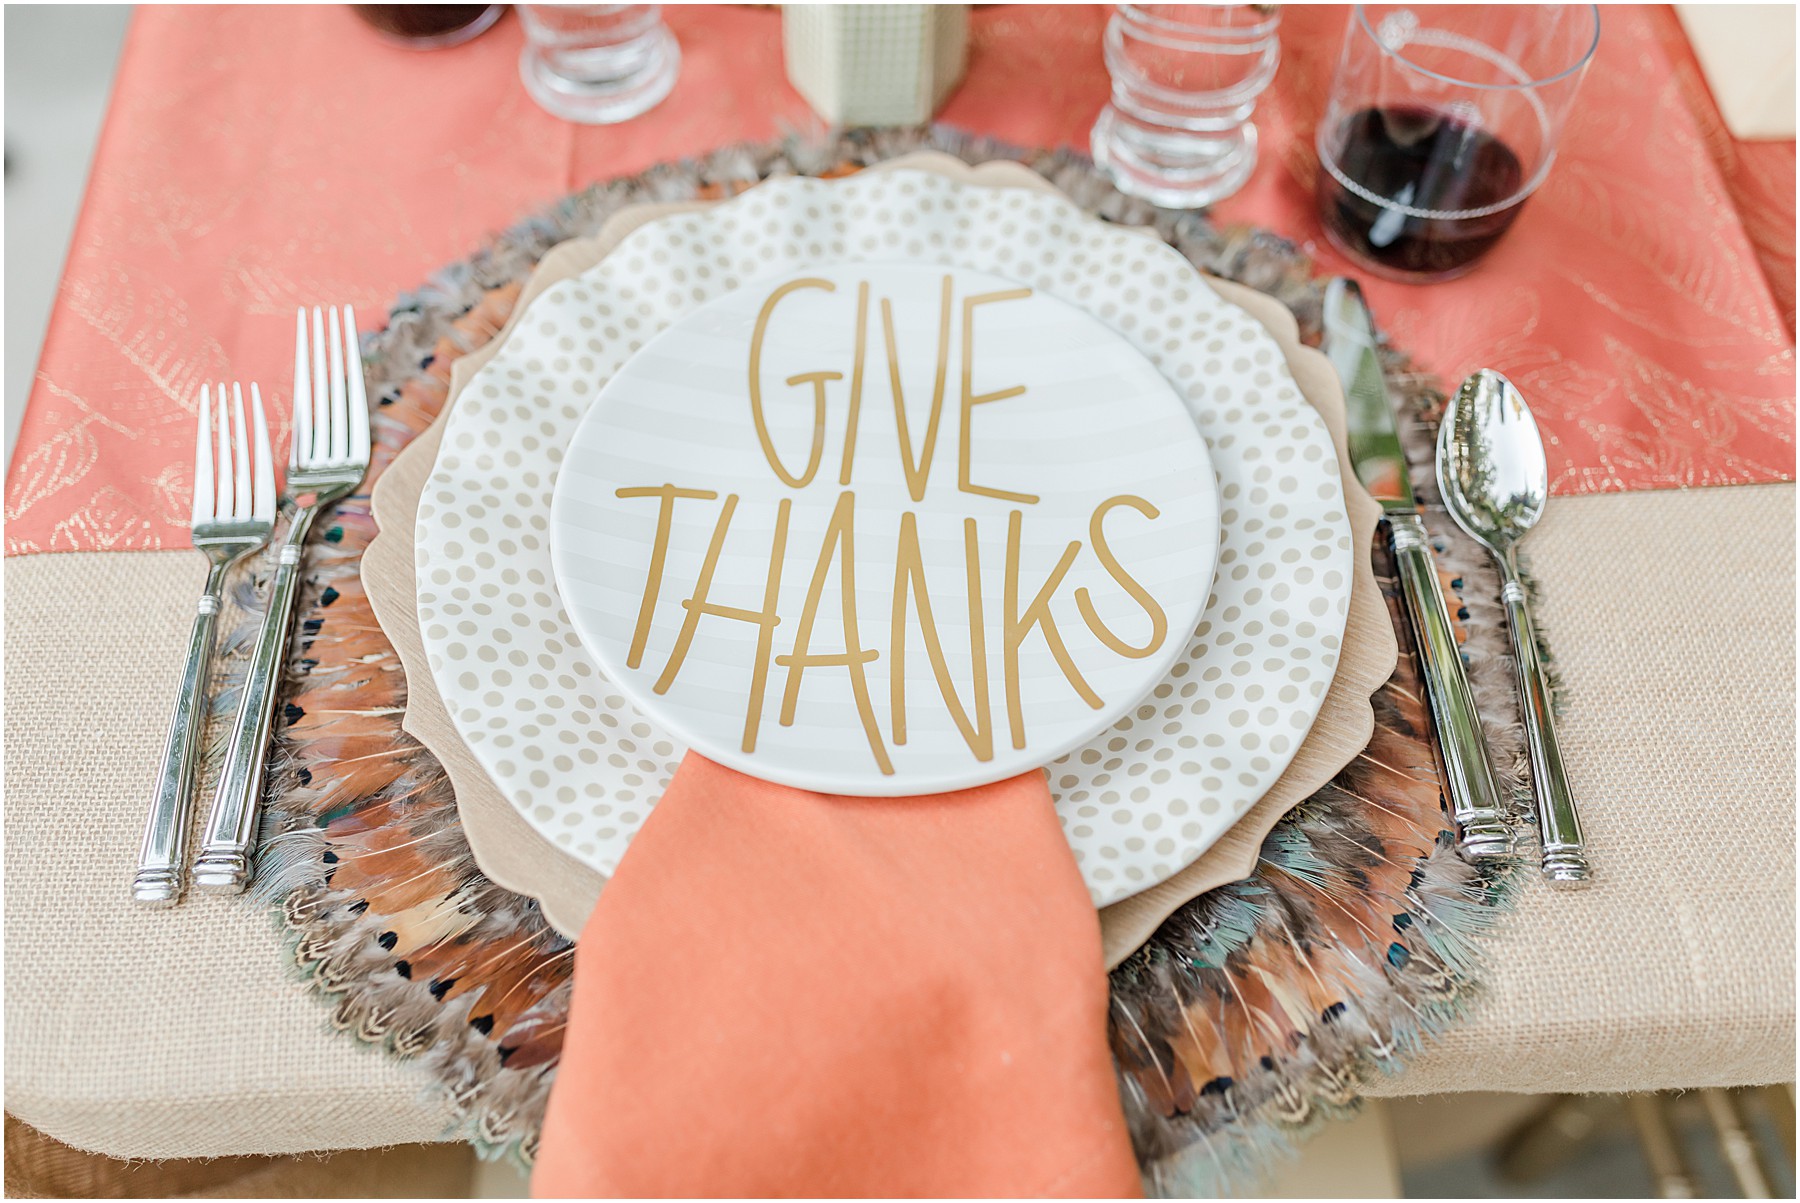 A thanksgiving table setting featuring a feather placemat and a plate that says "Give Thanks"